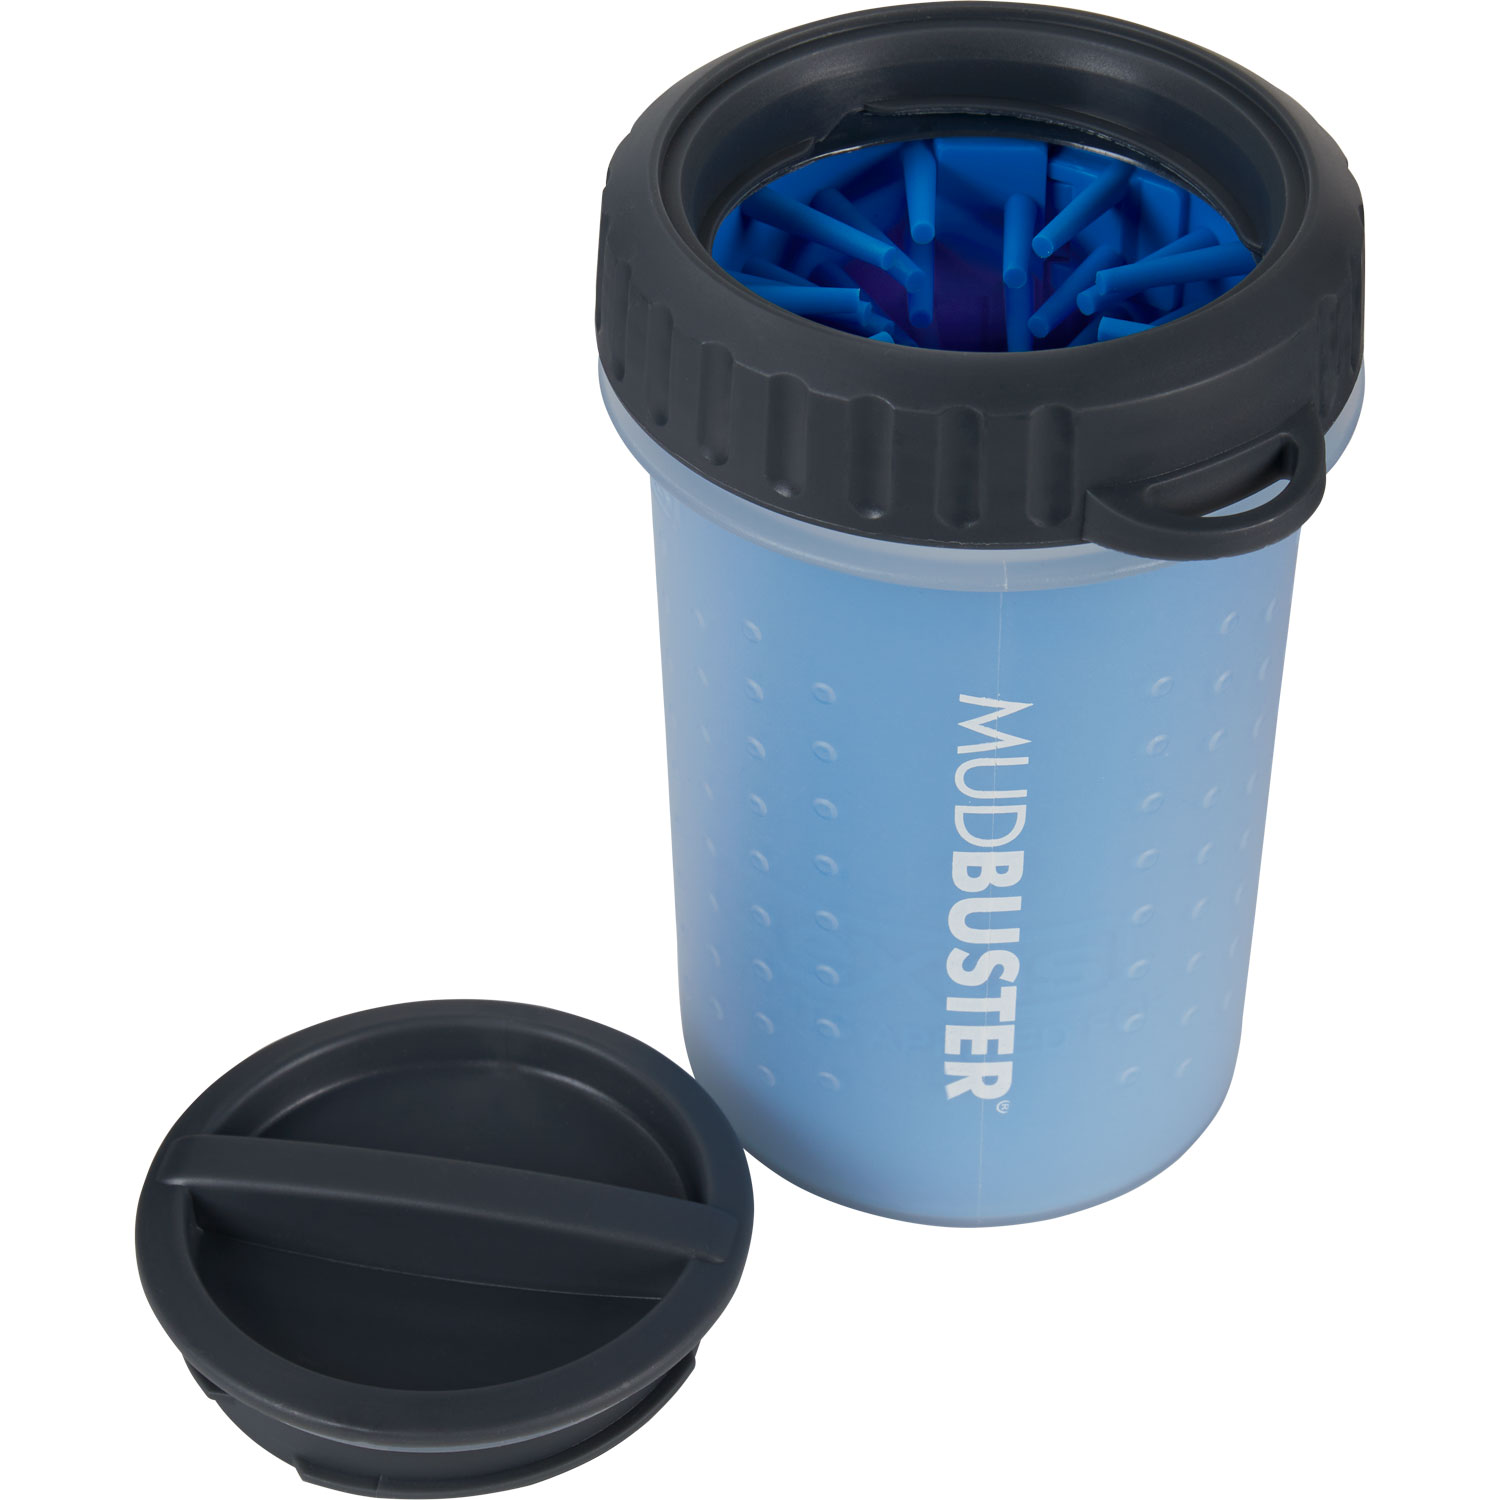 The Mudbuster Is a Must-Have For Cleaning Dirty Paws Quickly and Easily